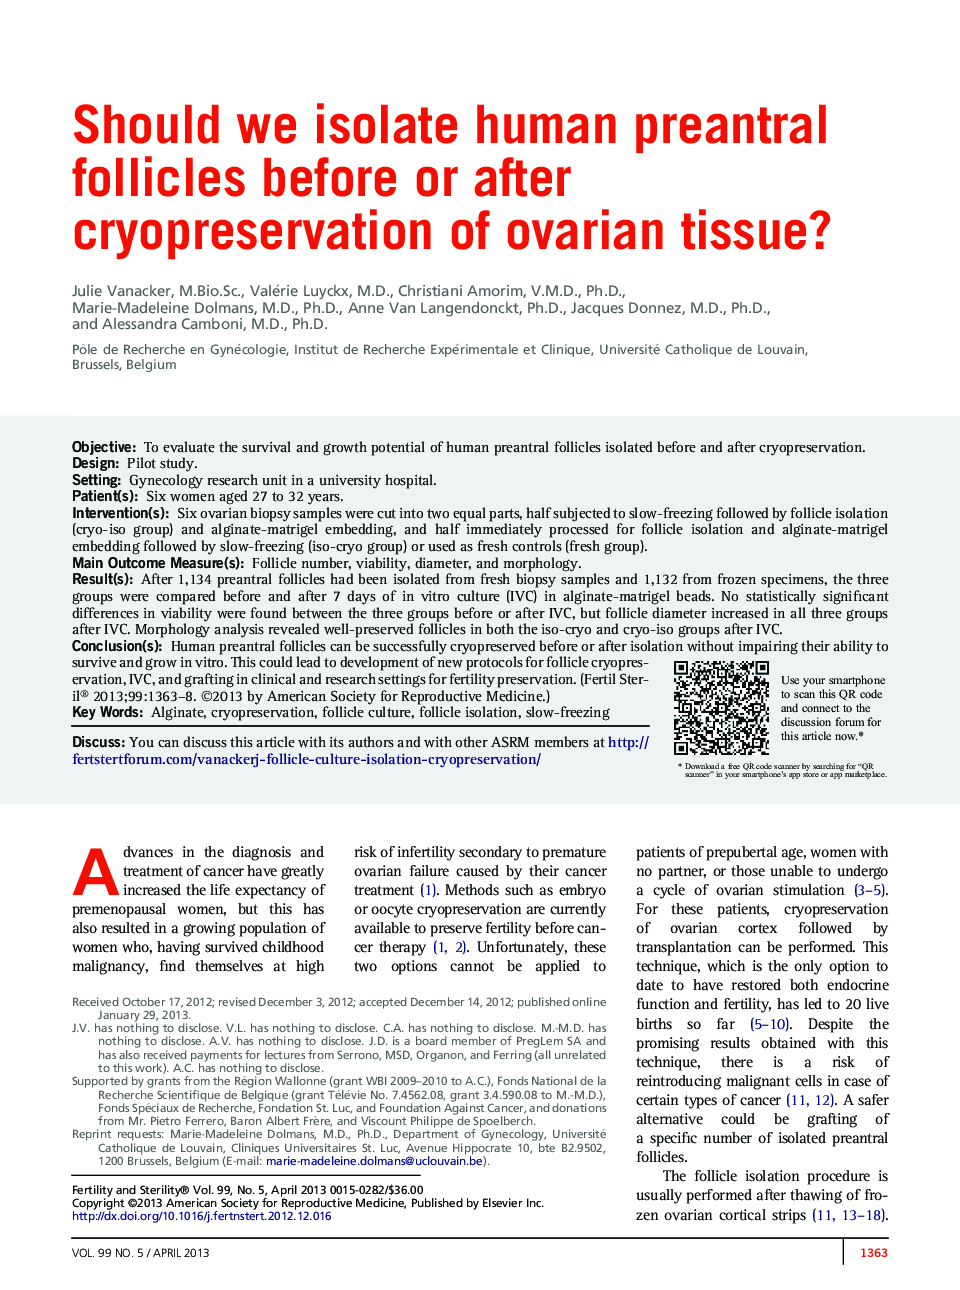 Should we isolate human preantral follicles before or after cryopreservation of ovarian tissue?